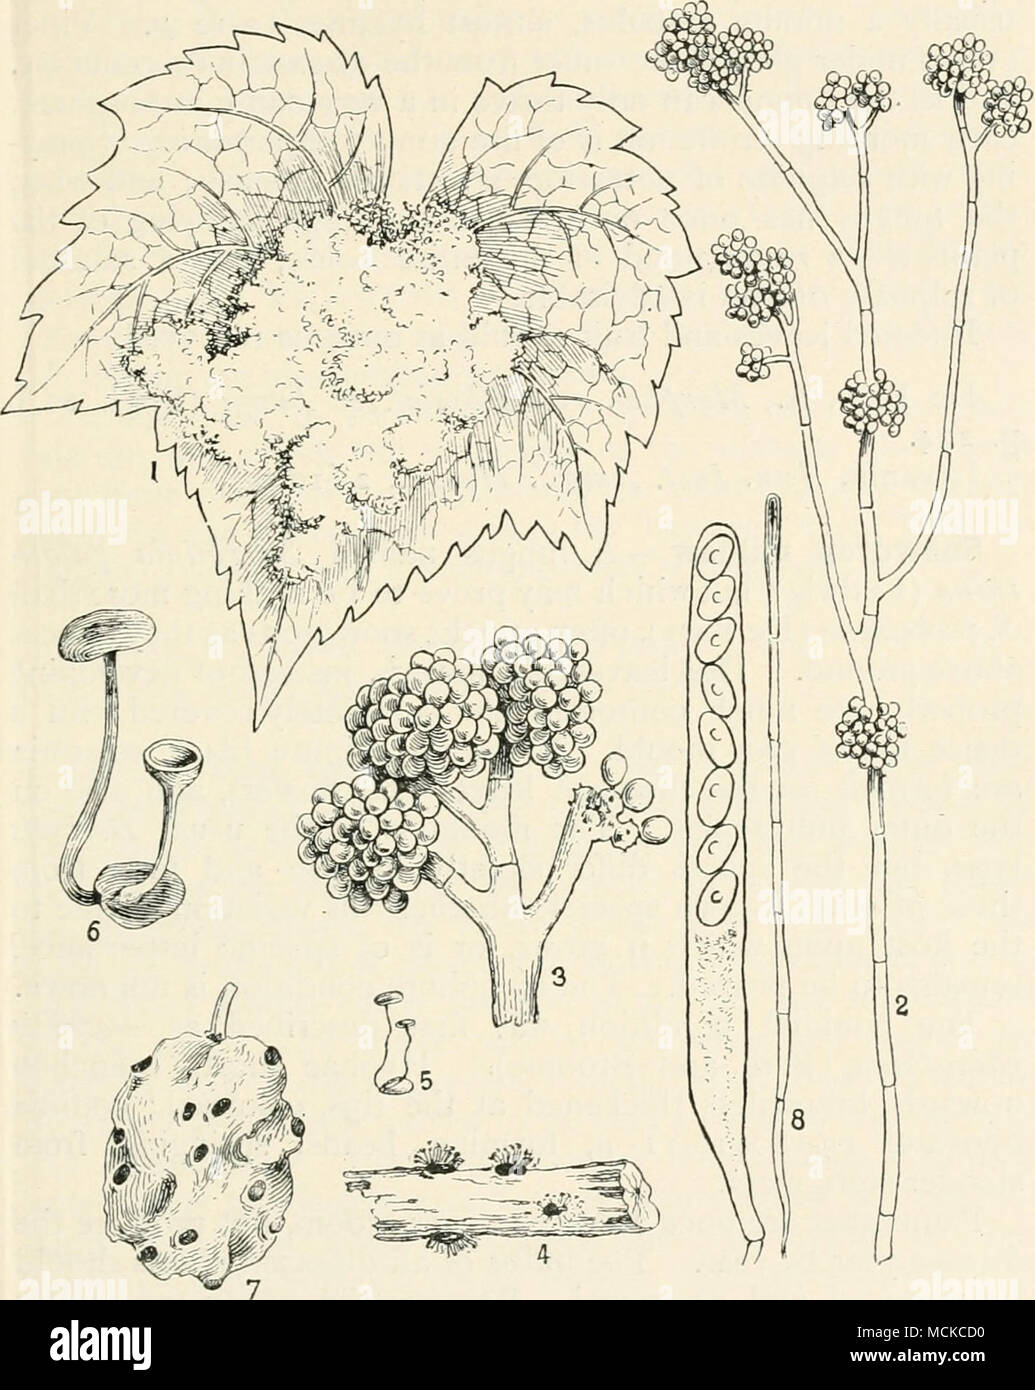 . Fig. ^-j.—Sclerotinia fuckeliana. i, vine leaf with Botrytis form of fungus ; 2, conidiophores of Botrytis ; 3, a head or cluster of conidia ; 4, sclerotia bearing Botrytis form of fruit ; 5, asclerotium bearing two ascophores ; 6, like fig. 5, on a larger scale ; 7, a shrivelled grape with sclerotia ; 8, ascus with spores. All e-xcept Fig. i mag. Ascophores yellowish-brown, 0-5-4 mm. across, stem slender, 2-3 springing from a small black sclerotium; spores lo-ii X6-7 /x. Stock Photo